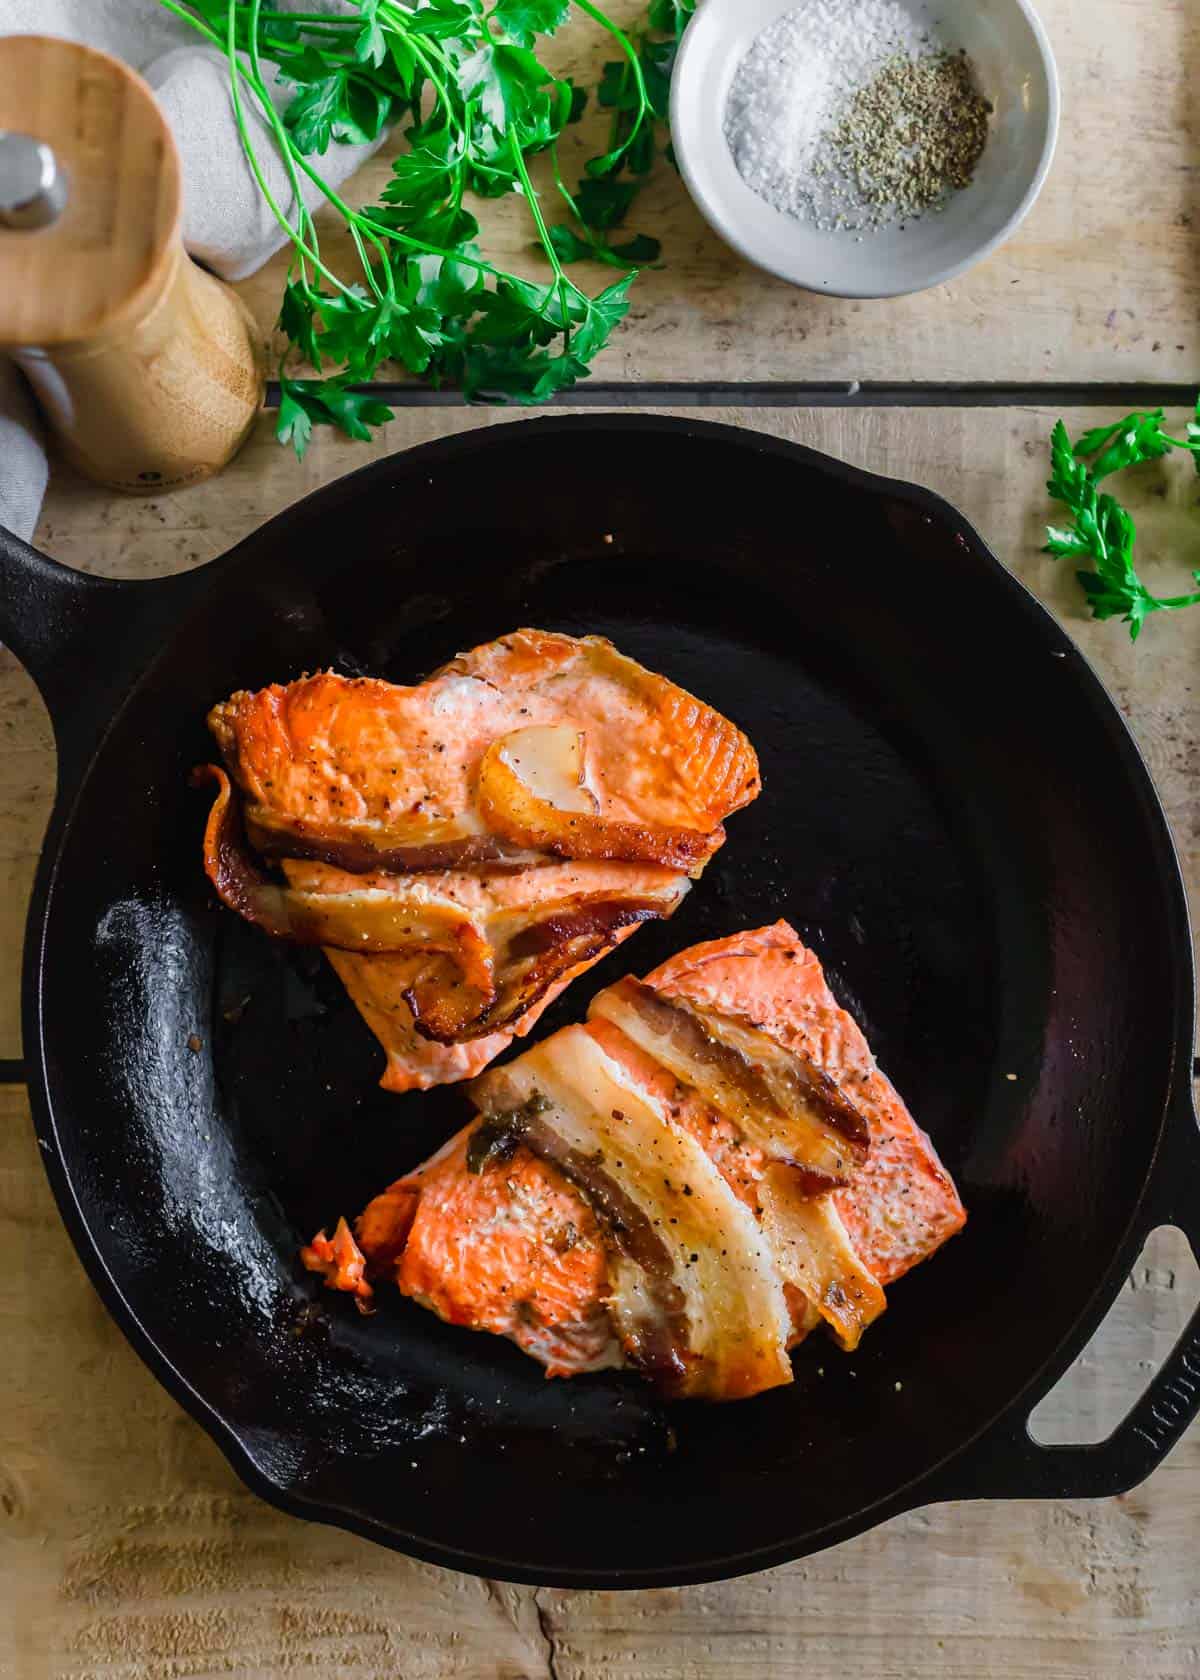 Pan-seared salmon wrapped in bacon in cast iron skillet.